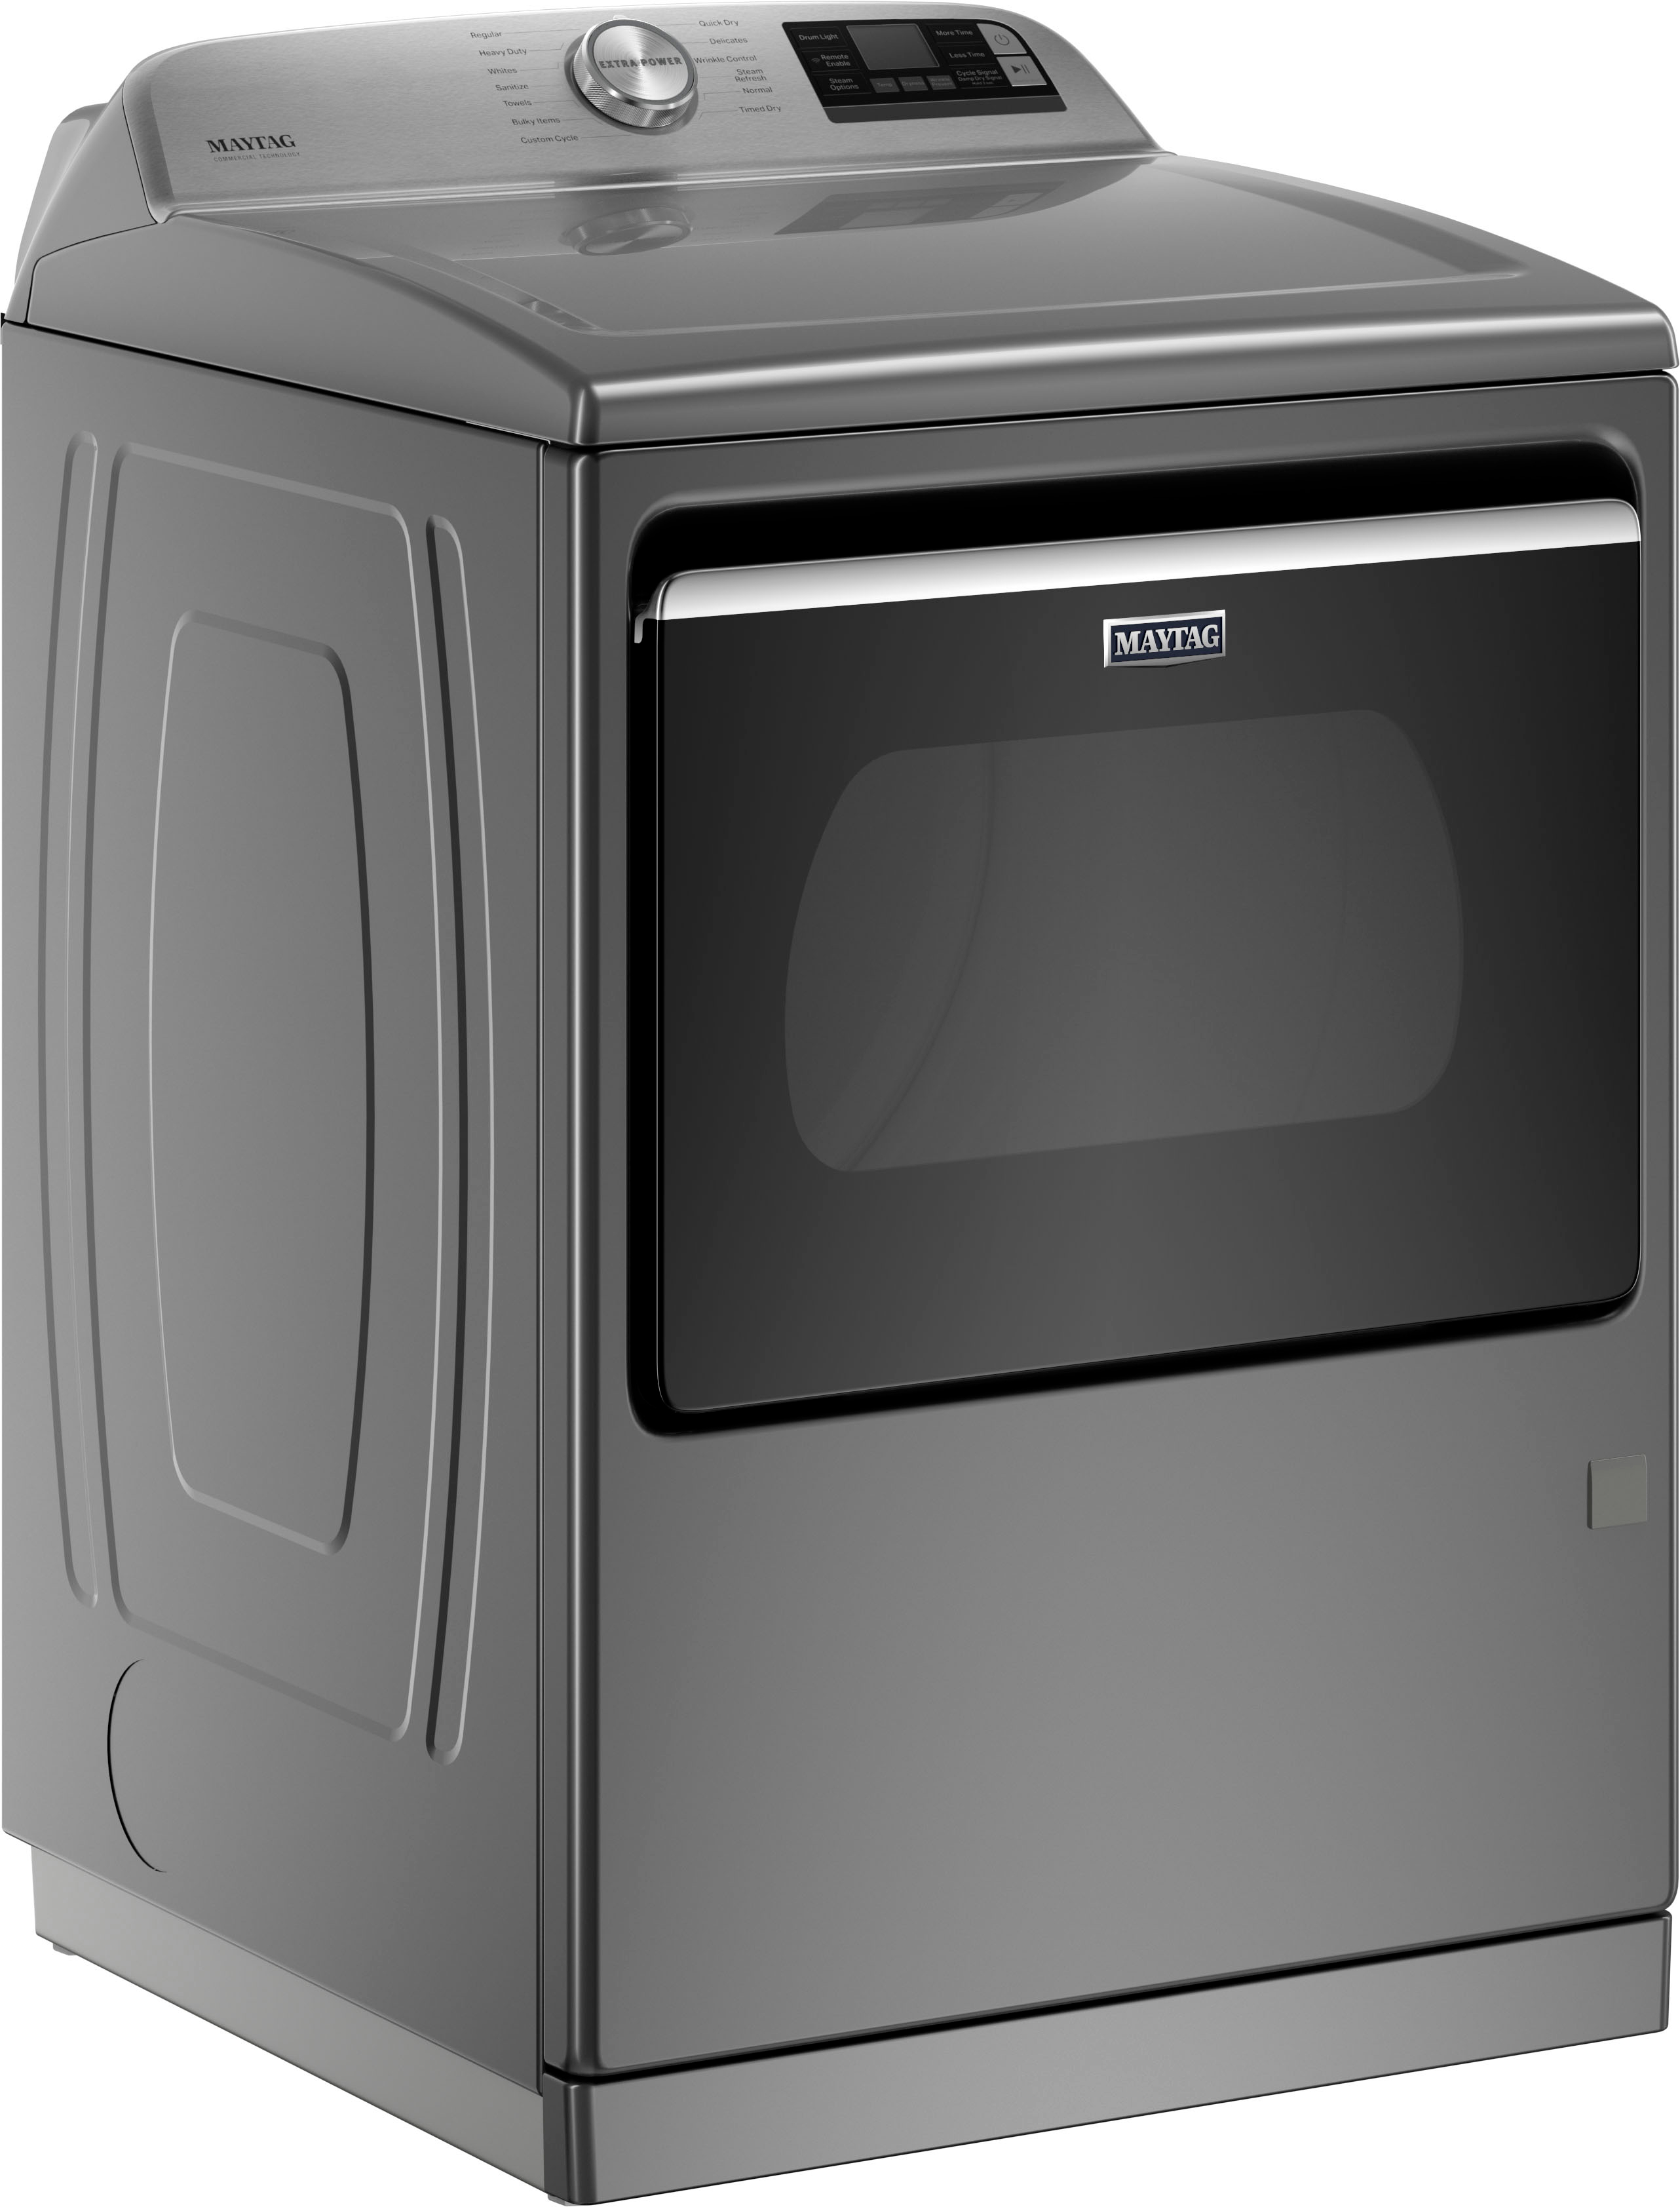 Angle View: Maytag - 7.4 Cu. Ft. Smart Gas Dryer with Steam and Extra Power Button - Metallic slate